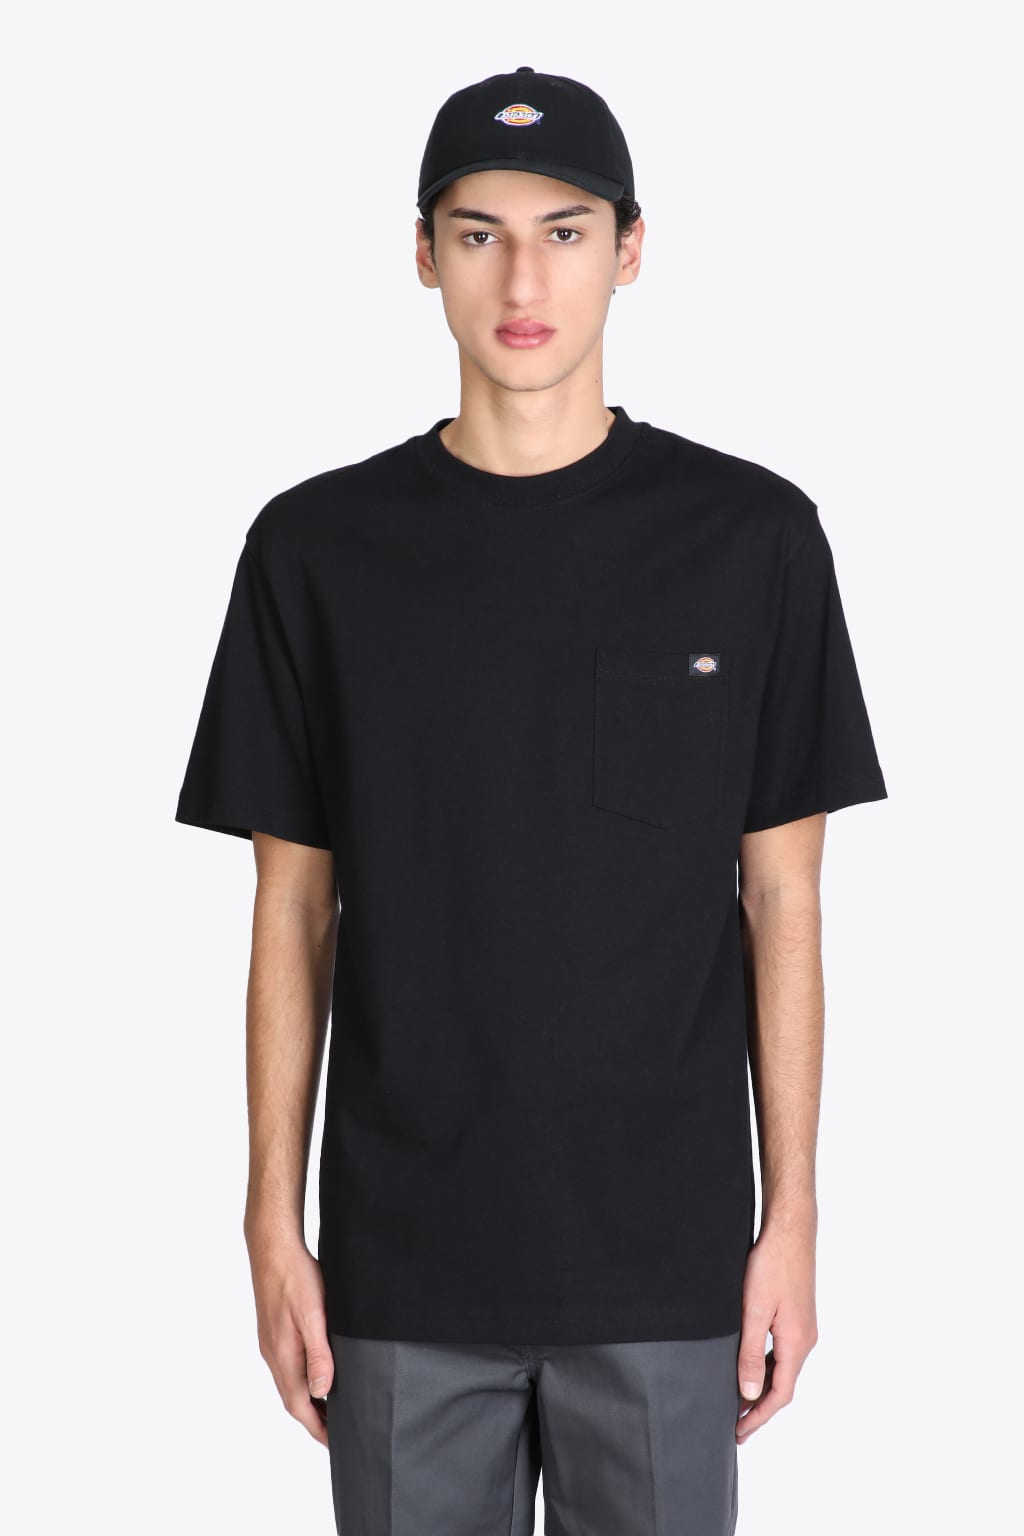 Dickies Porterdale Black cotton t-shirt with chest pocket - Porterdale